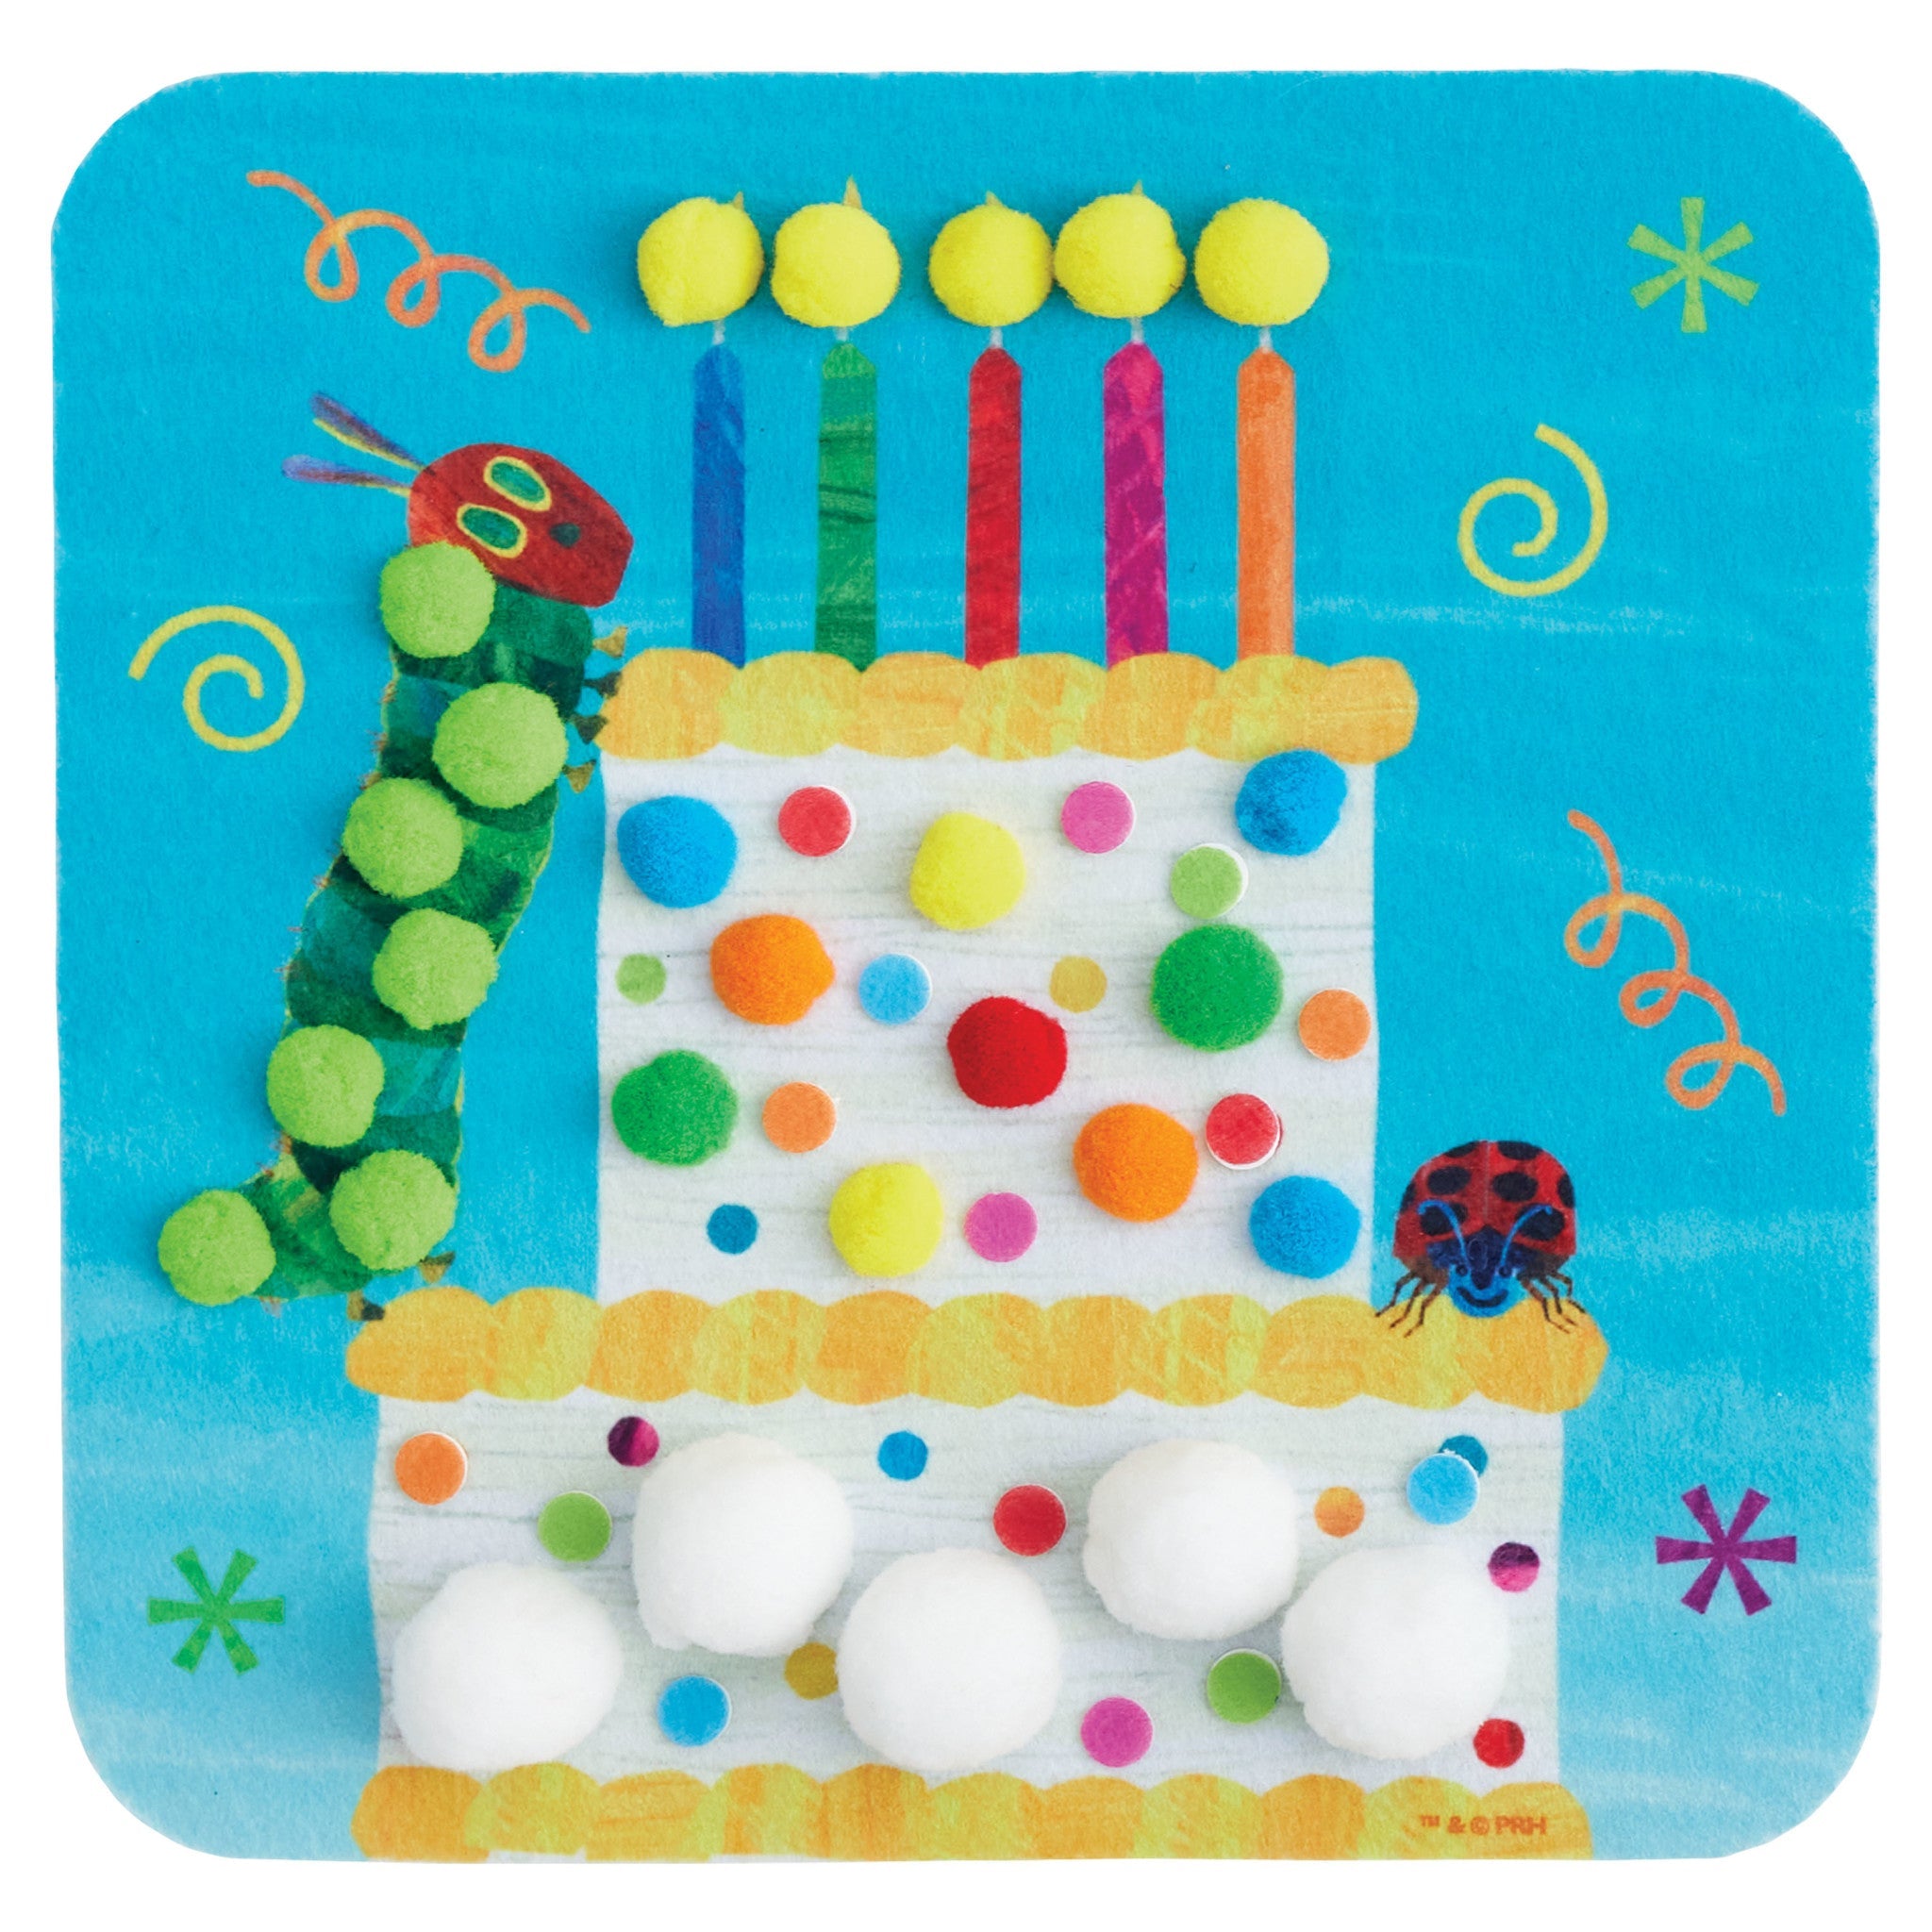 The Very Hungry Caterpillar Craft & Play Pictures